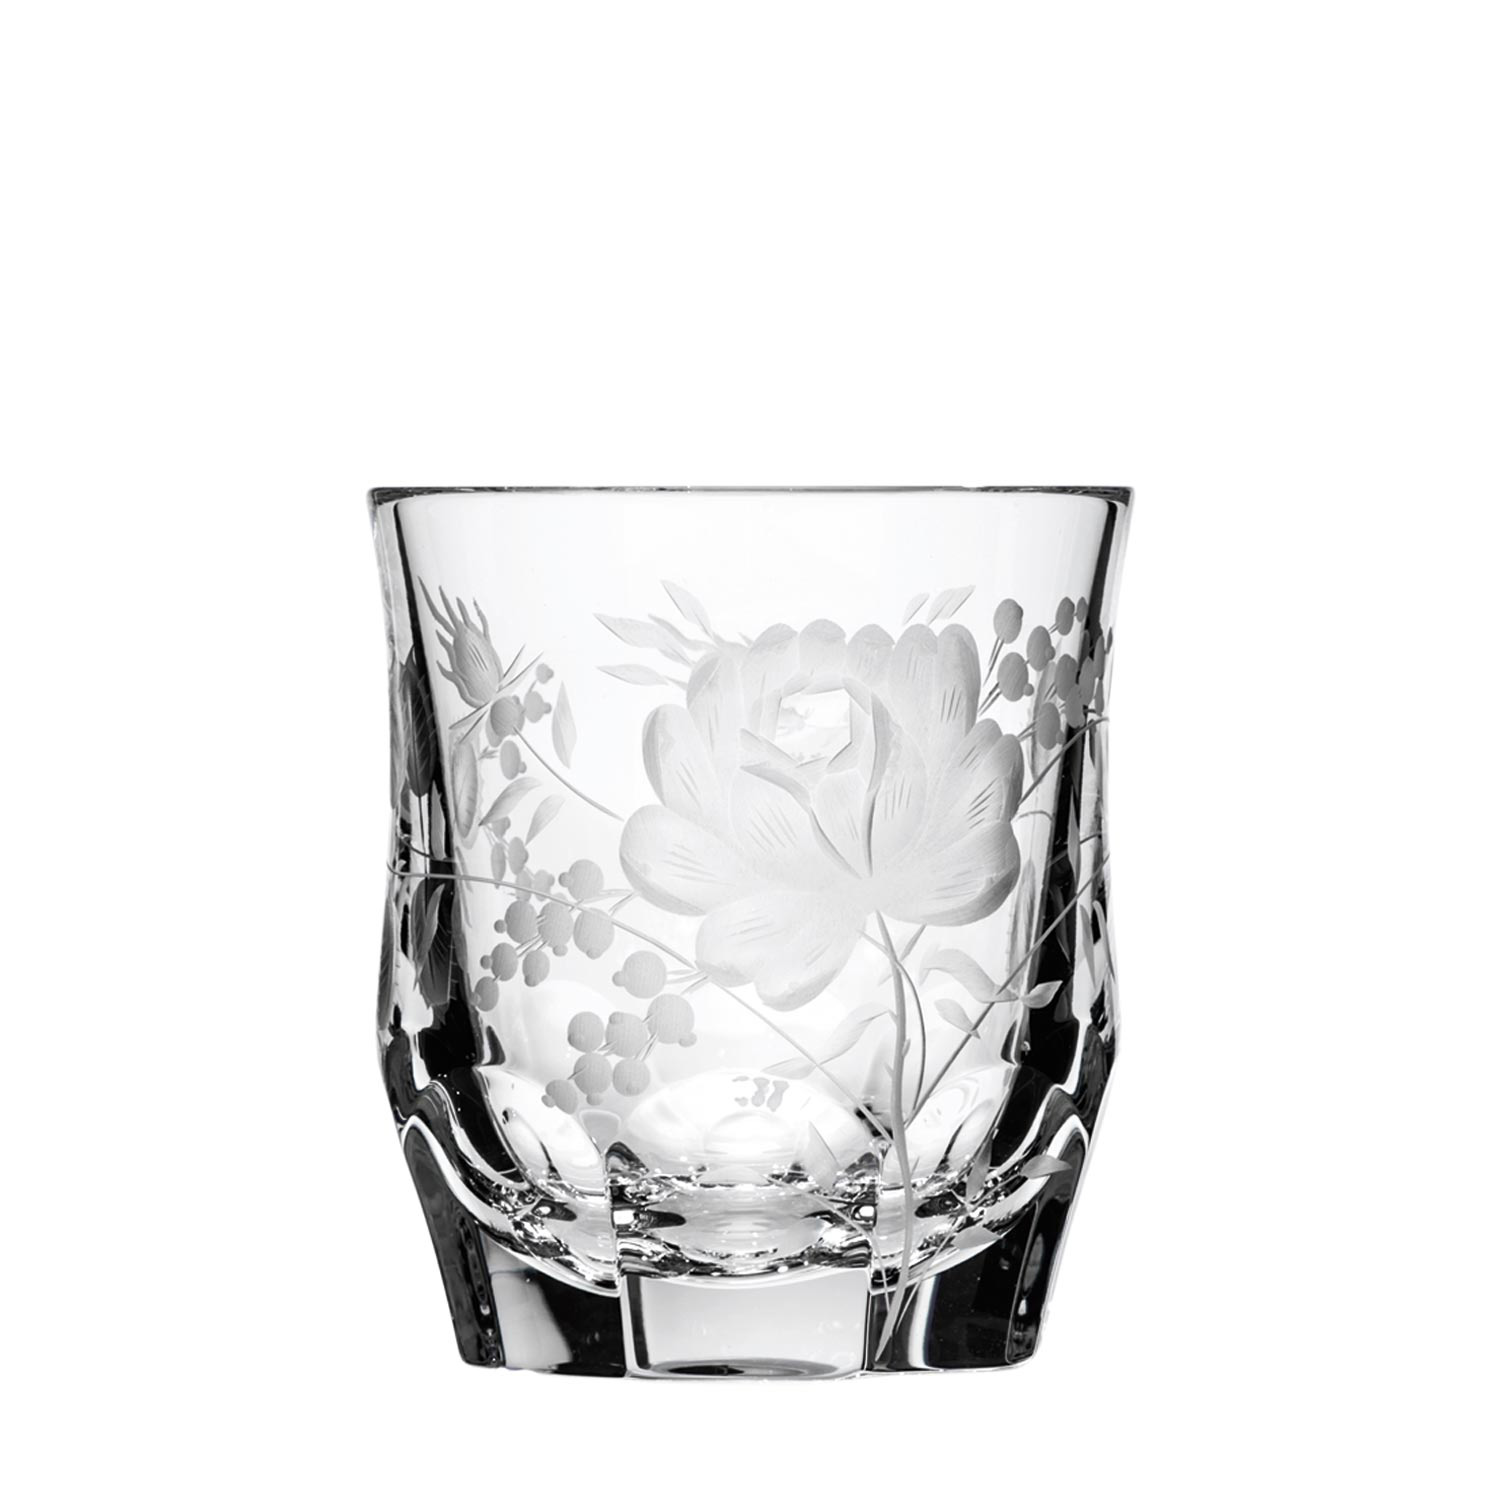 Whiskey glass crystal Primerose clear (9 cm)